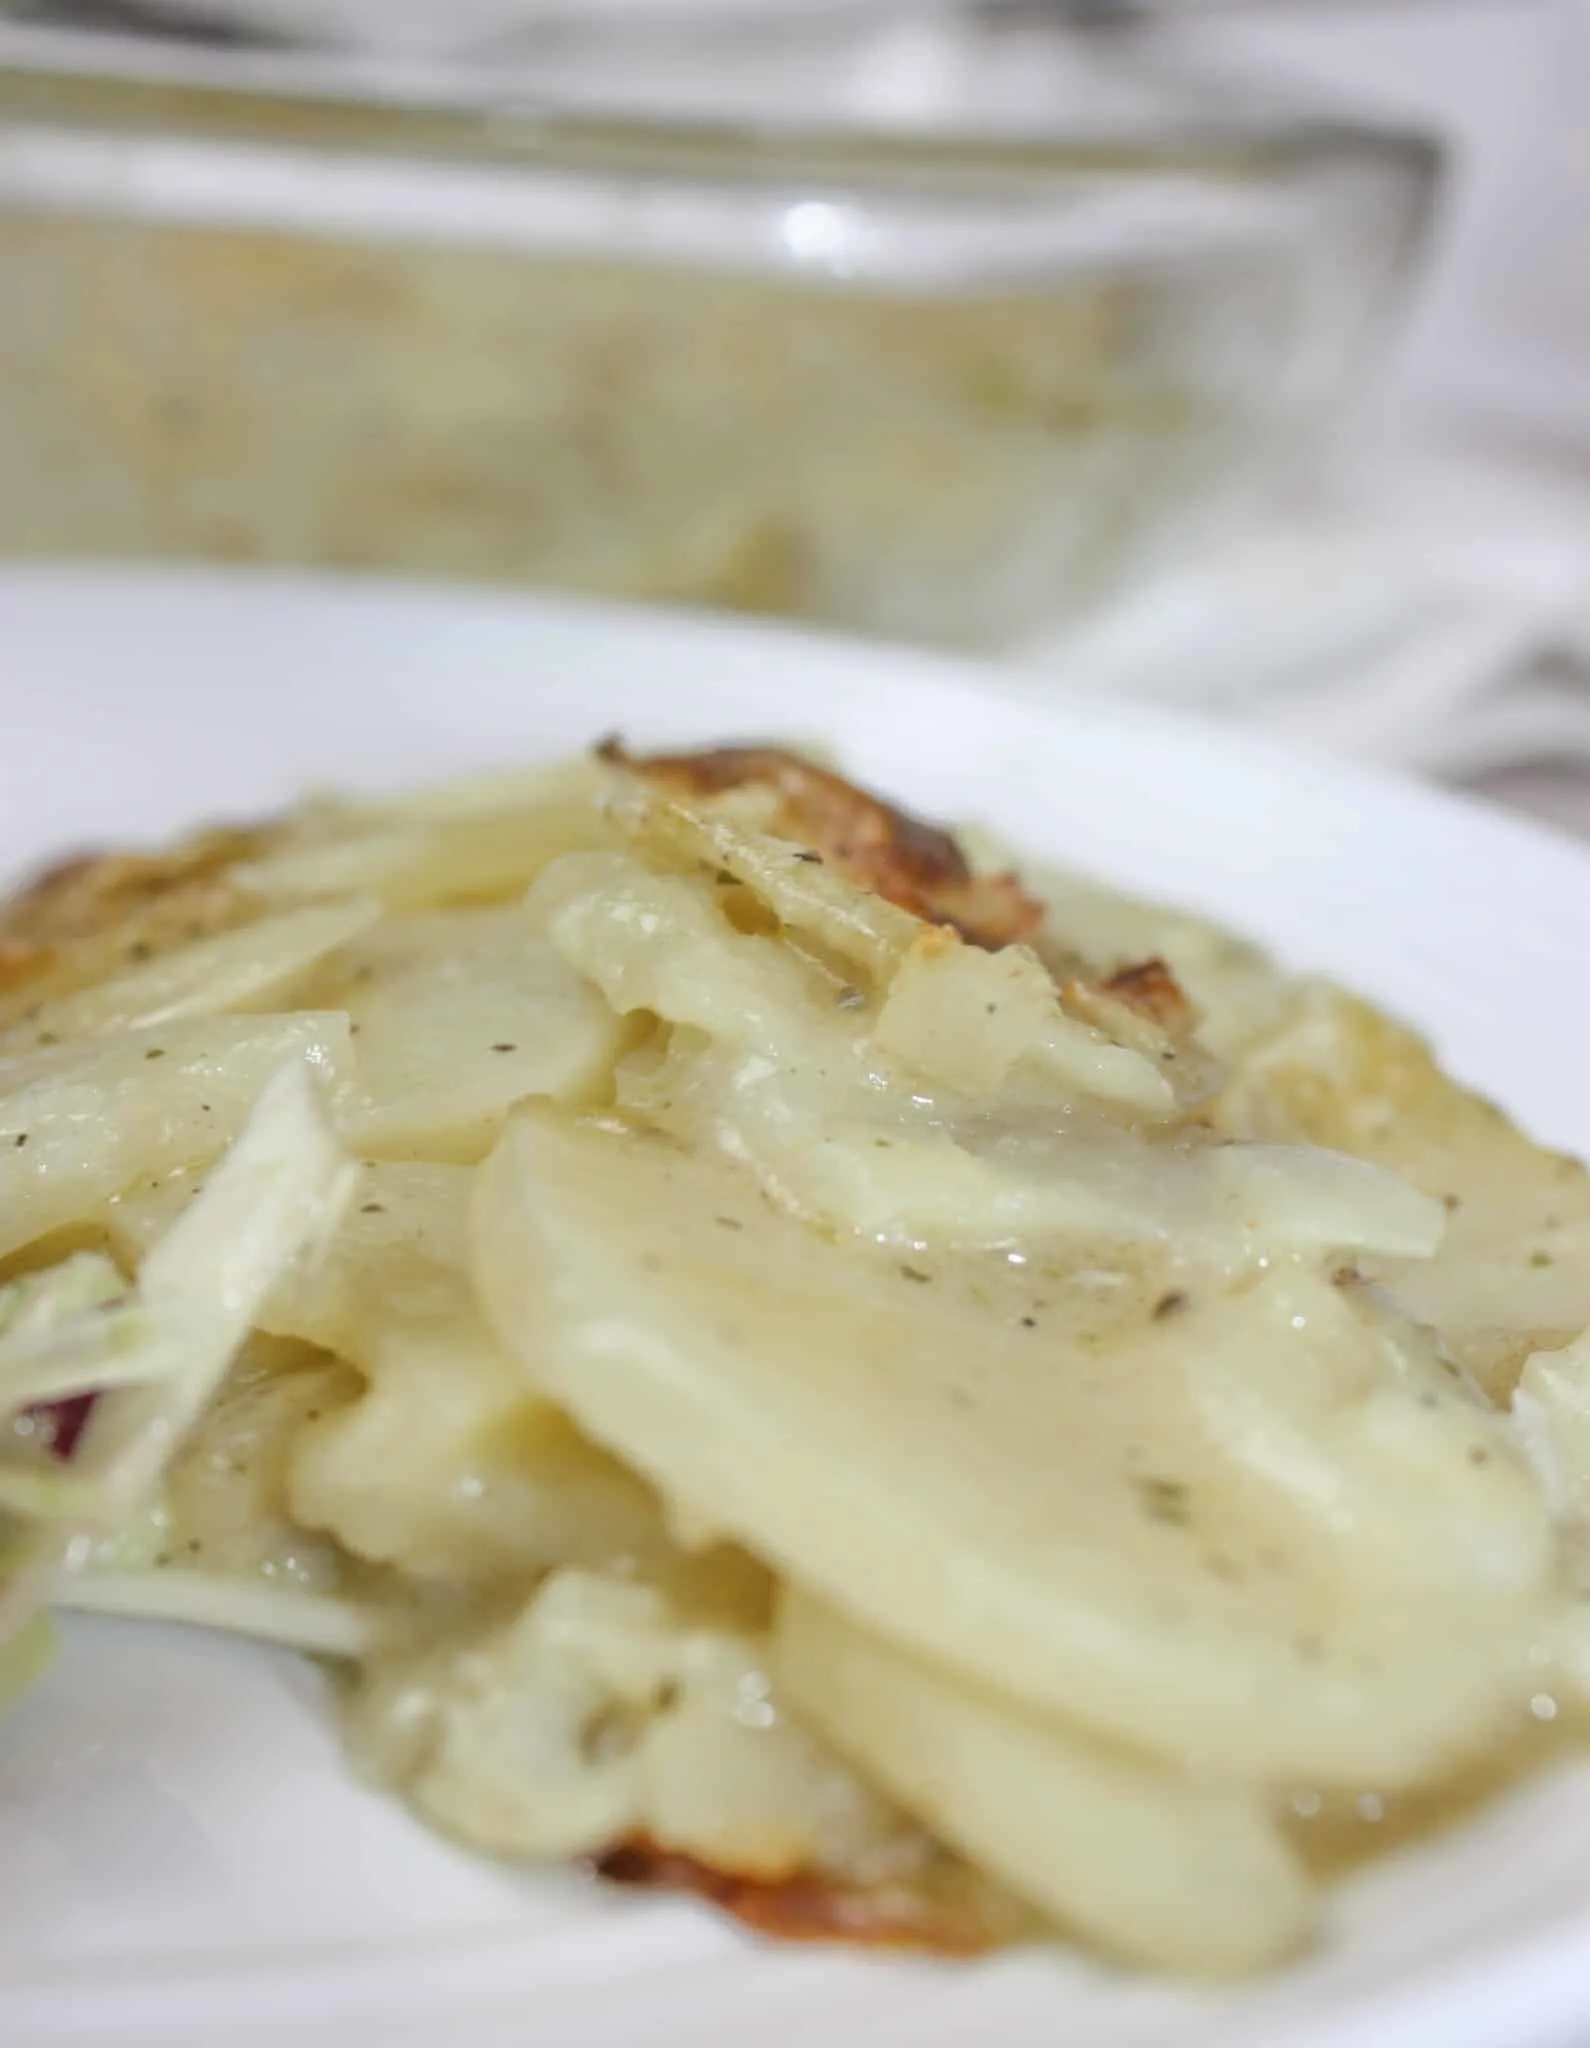 Scalloped Potatoes are a great comfort side dish.  I have been missing them since having to avoid gluten and dairy. This variation made with almond milk and Bob's Red Mill Gluten Free All Purpose Flour really hit the spot!